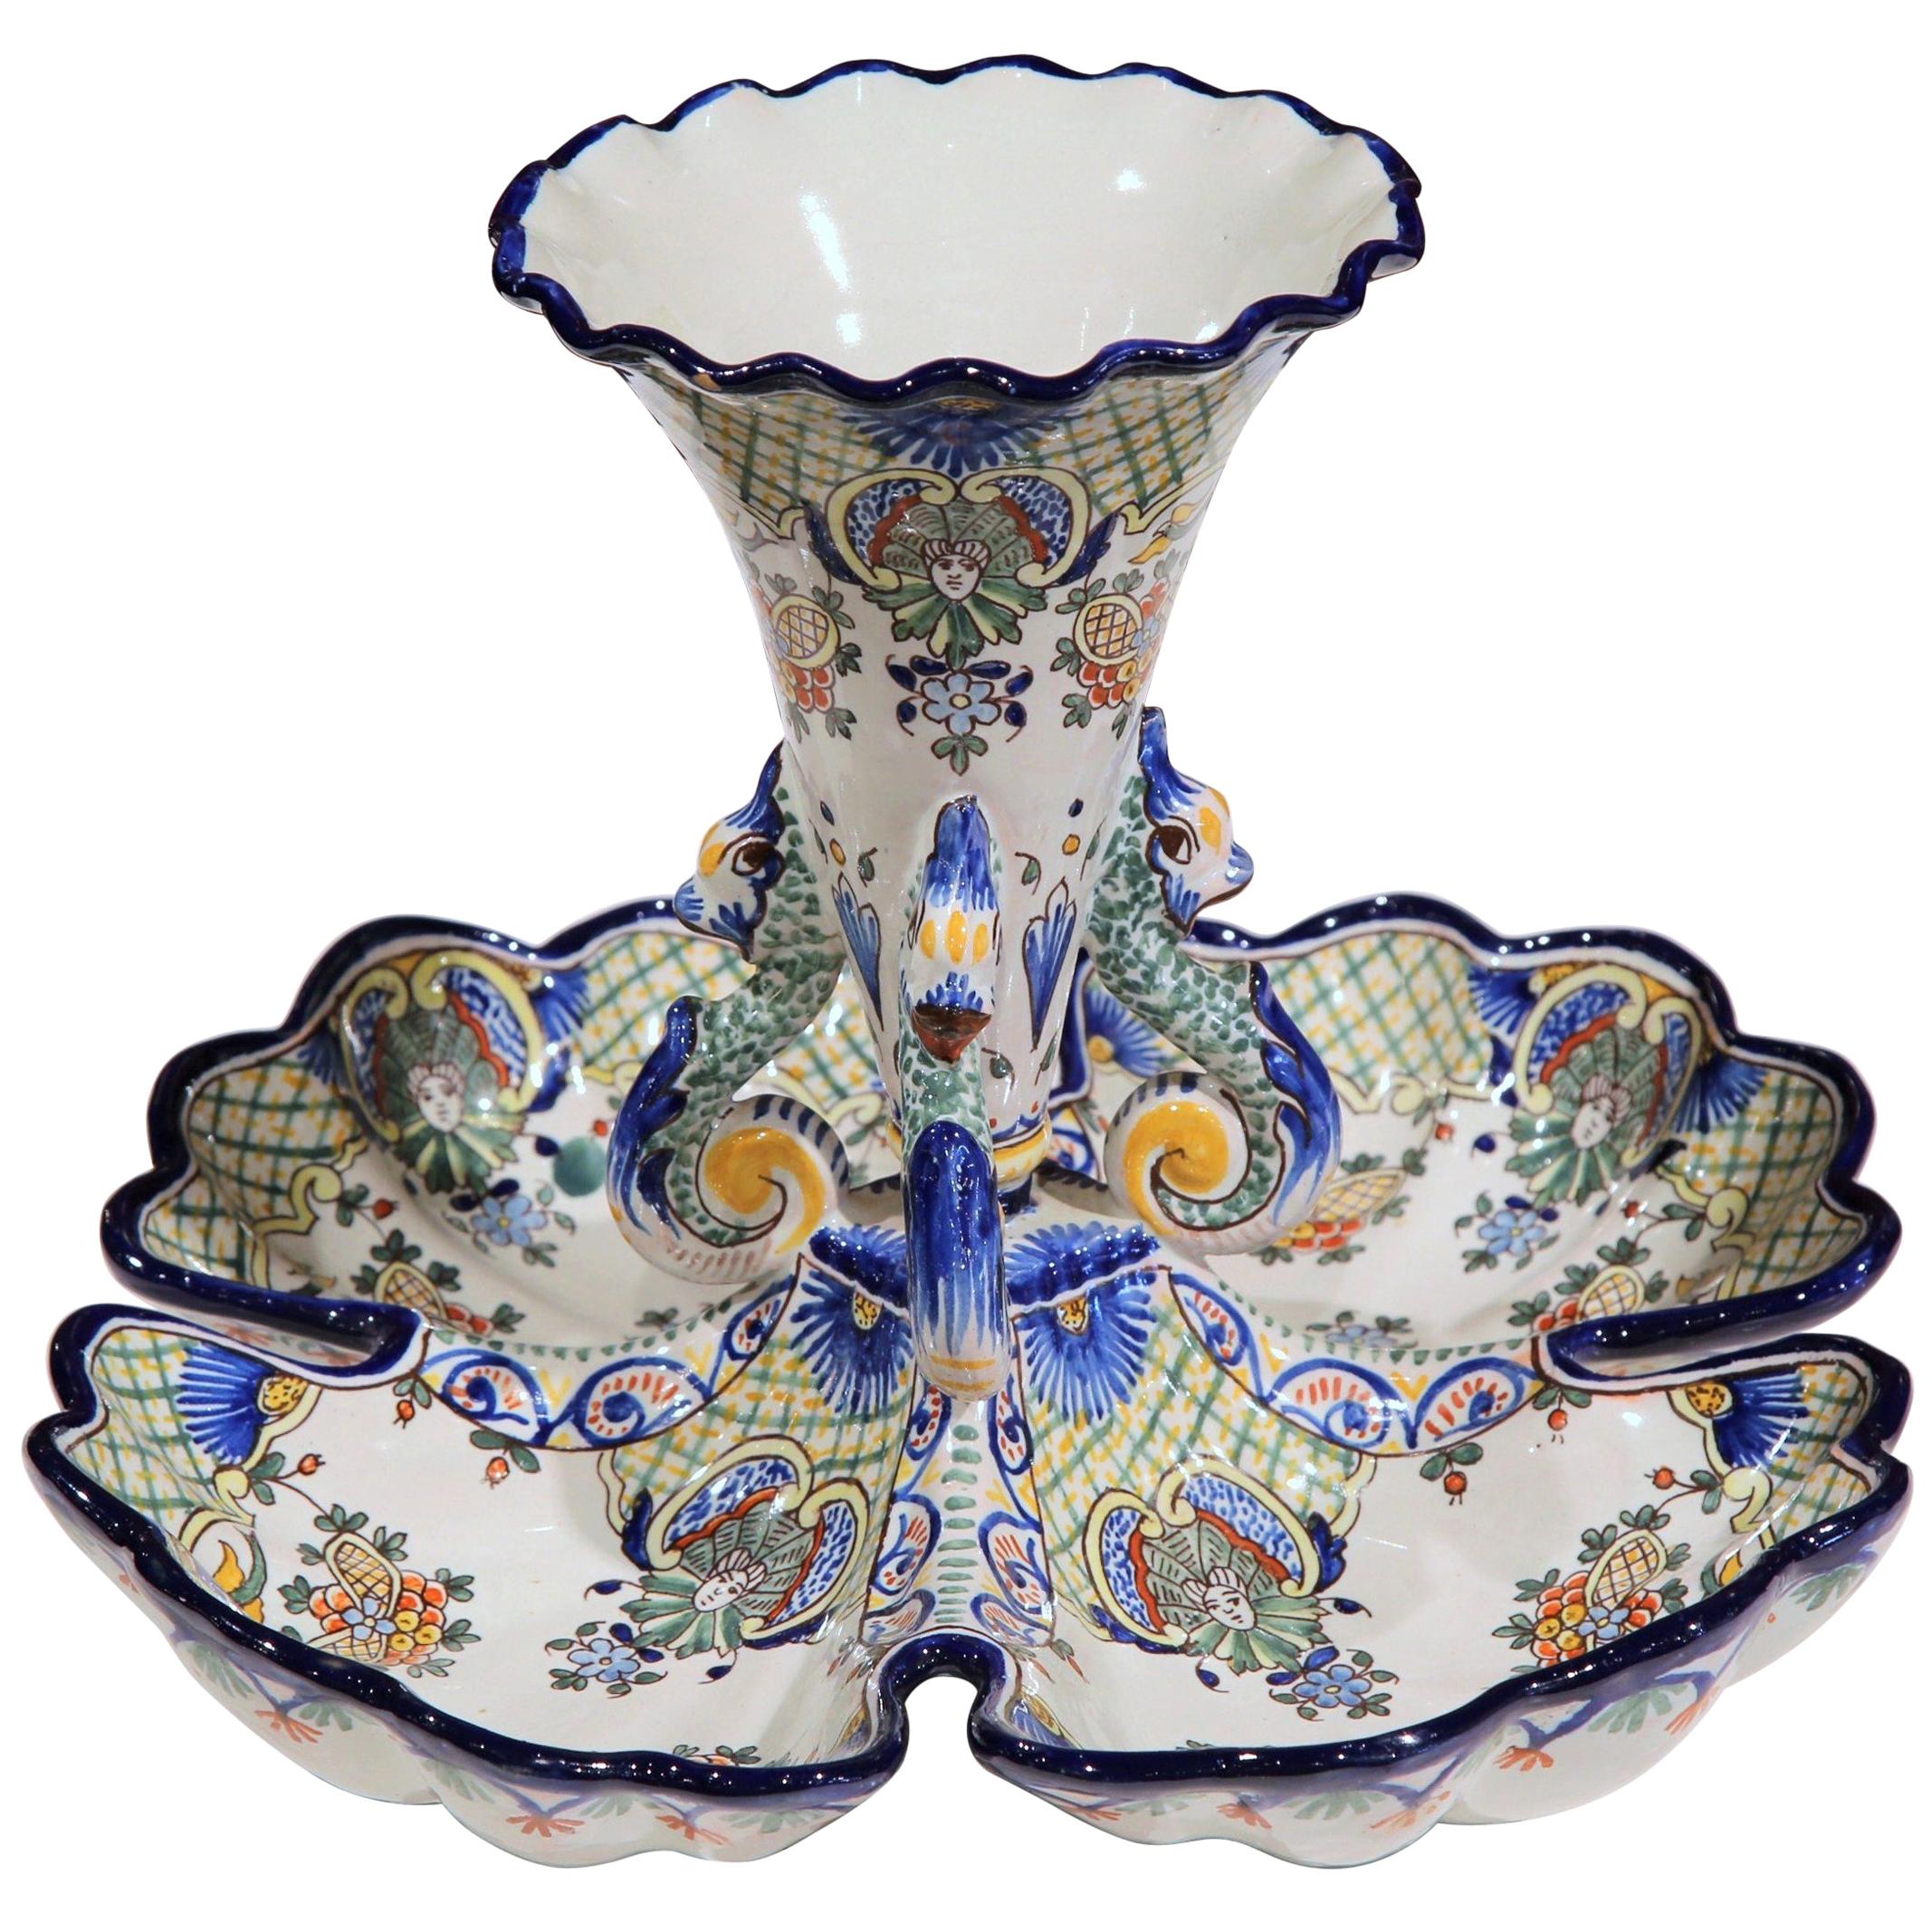 Early 20th Century French Hand Painted Faience Dish with Vase from Nevers